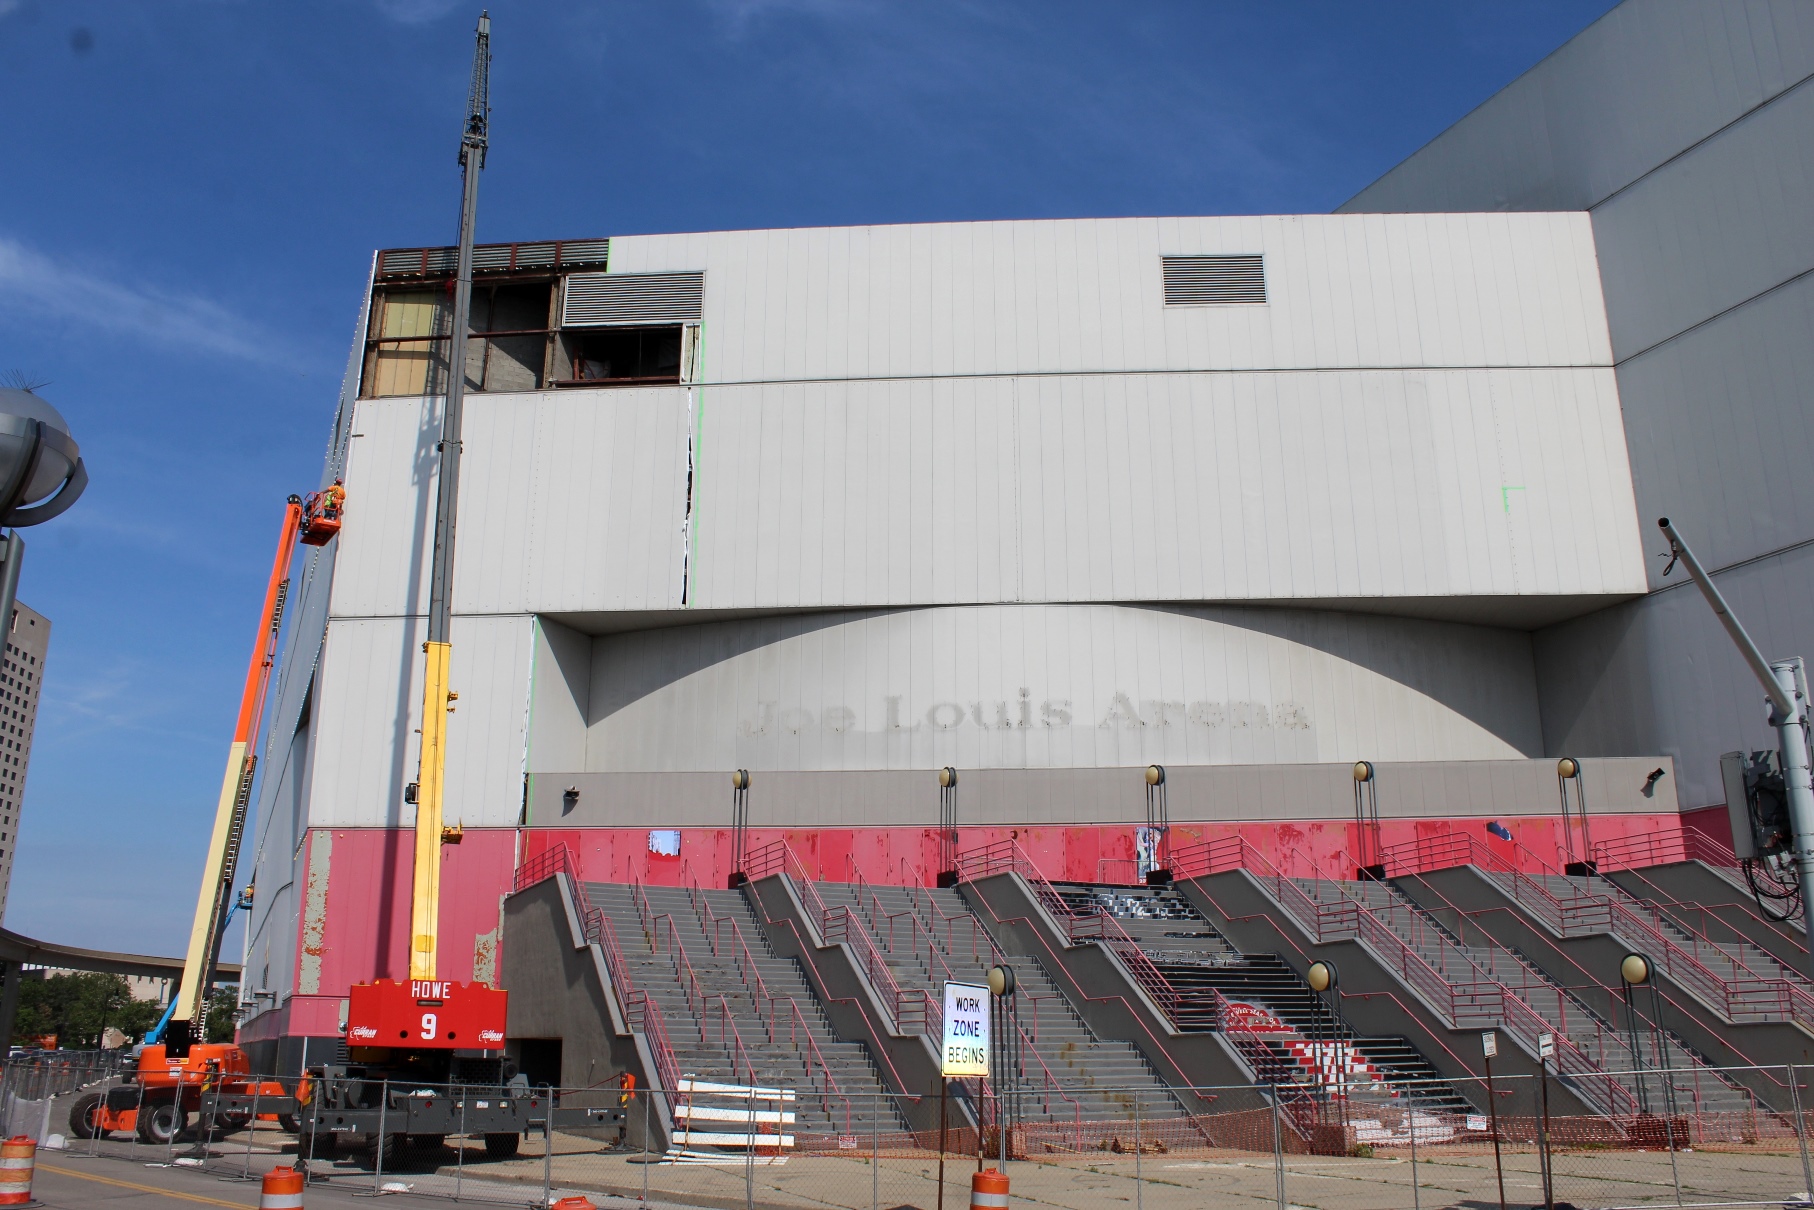 Demolition continues at the site of Joe Louis Arena